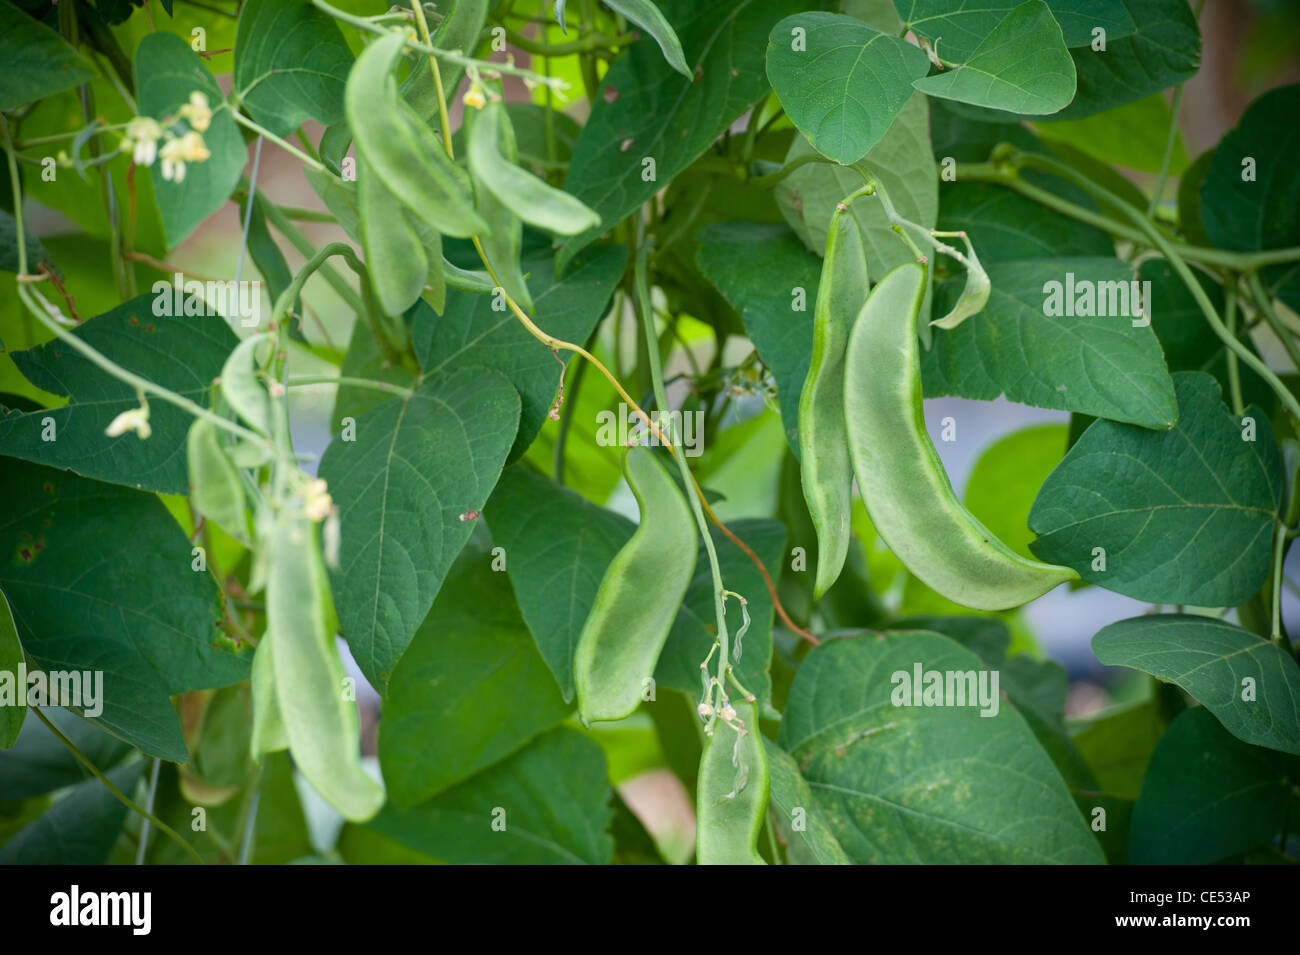 Snow peas hanging on plant of crop on produce farm Stock Photo